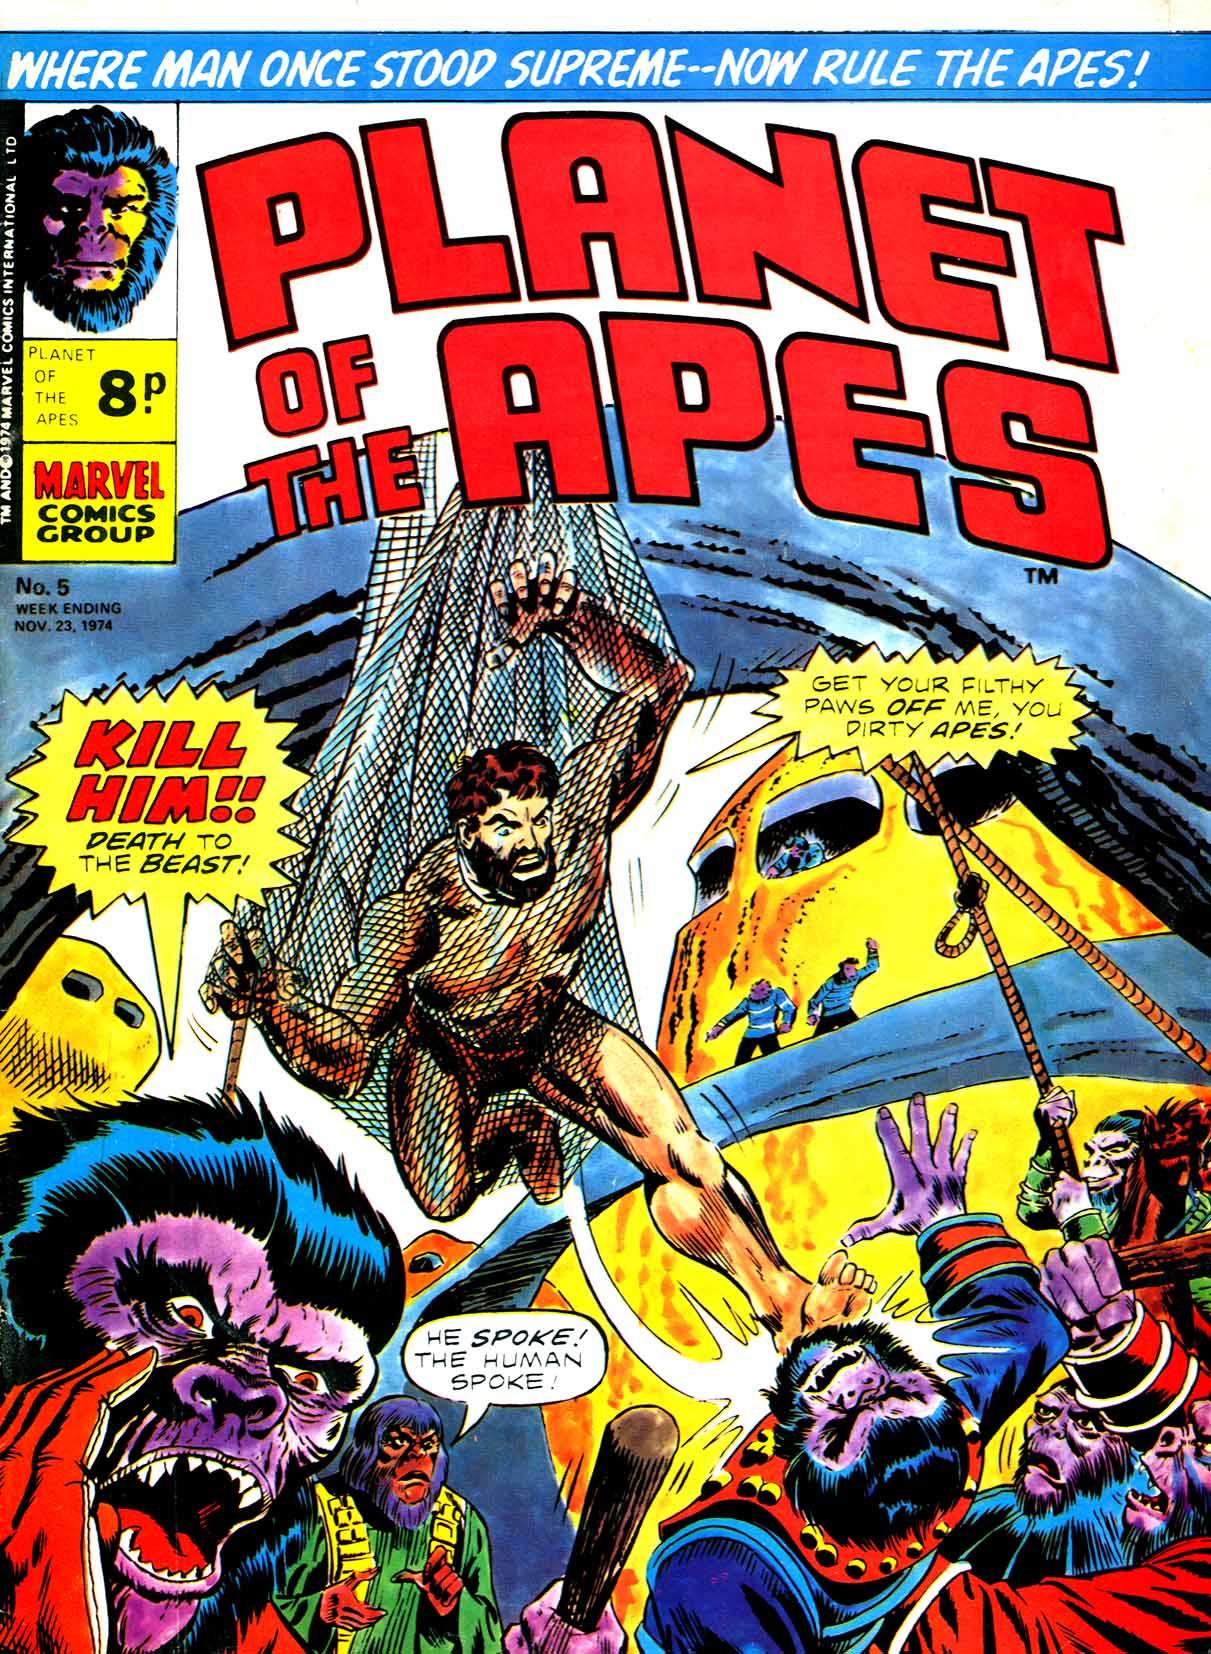 Planet of the Apes (UK) Vol. 1 #5